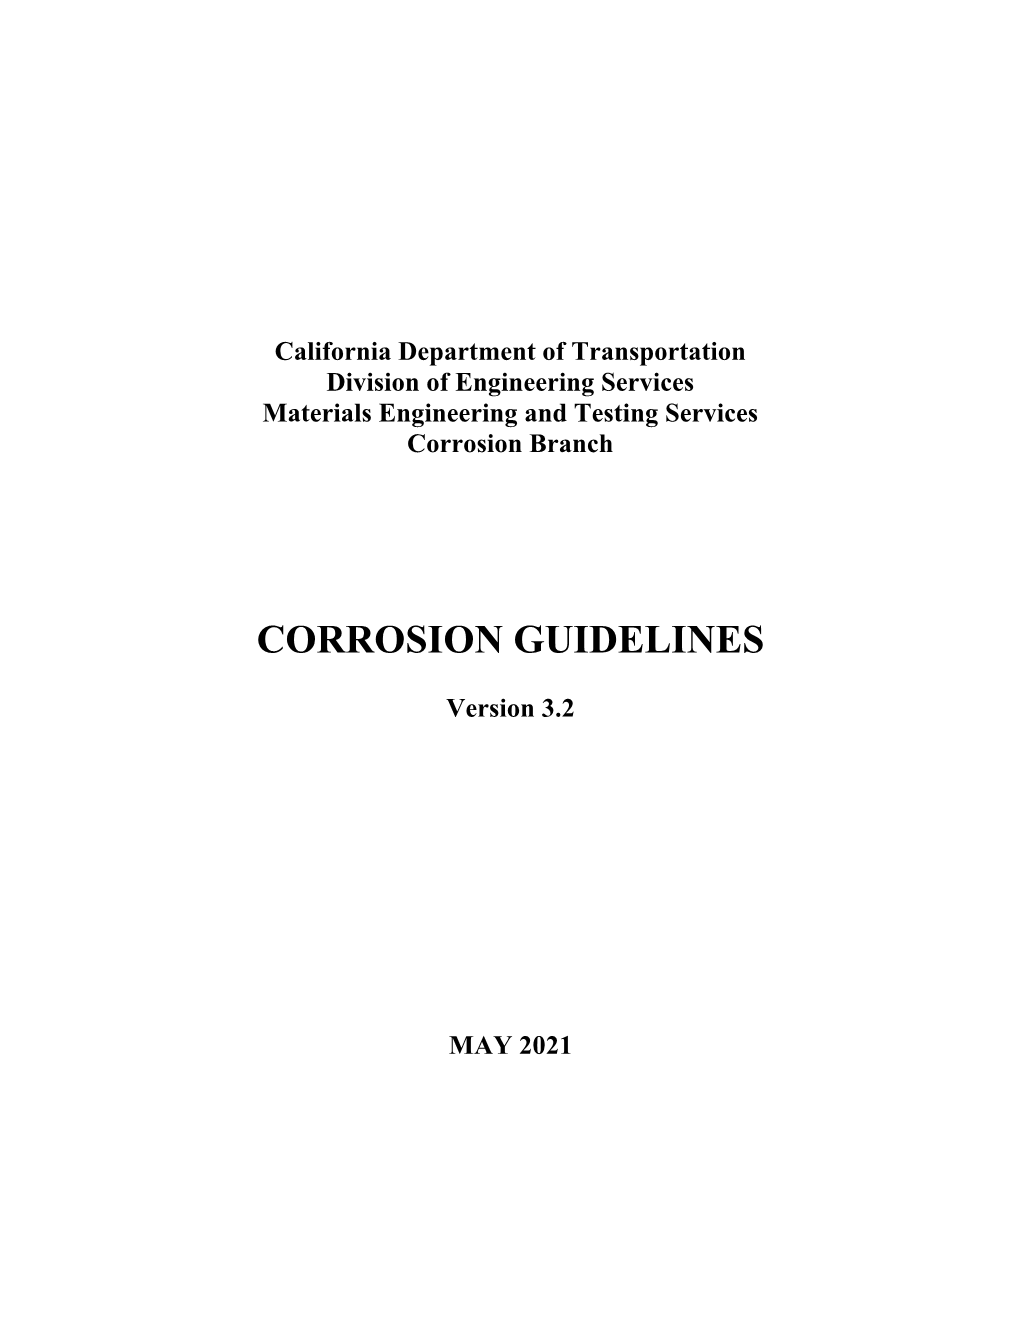 Corrosion Guidelines (PDF)